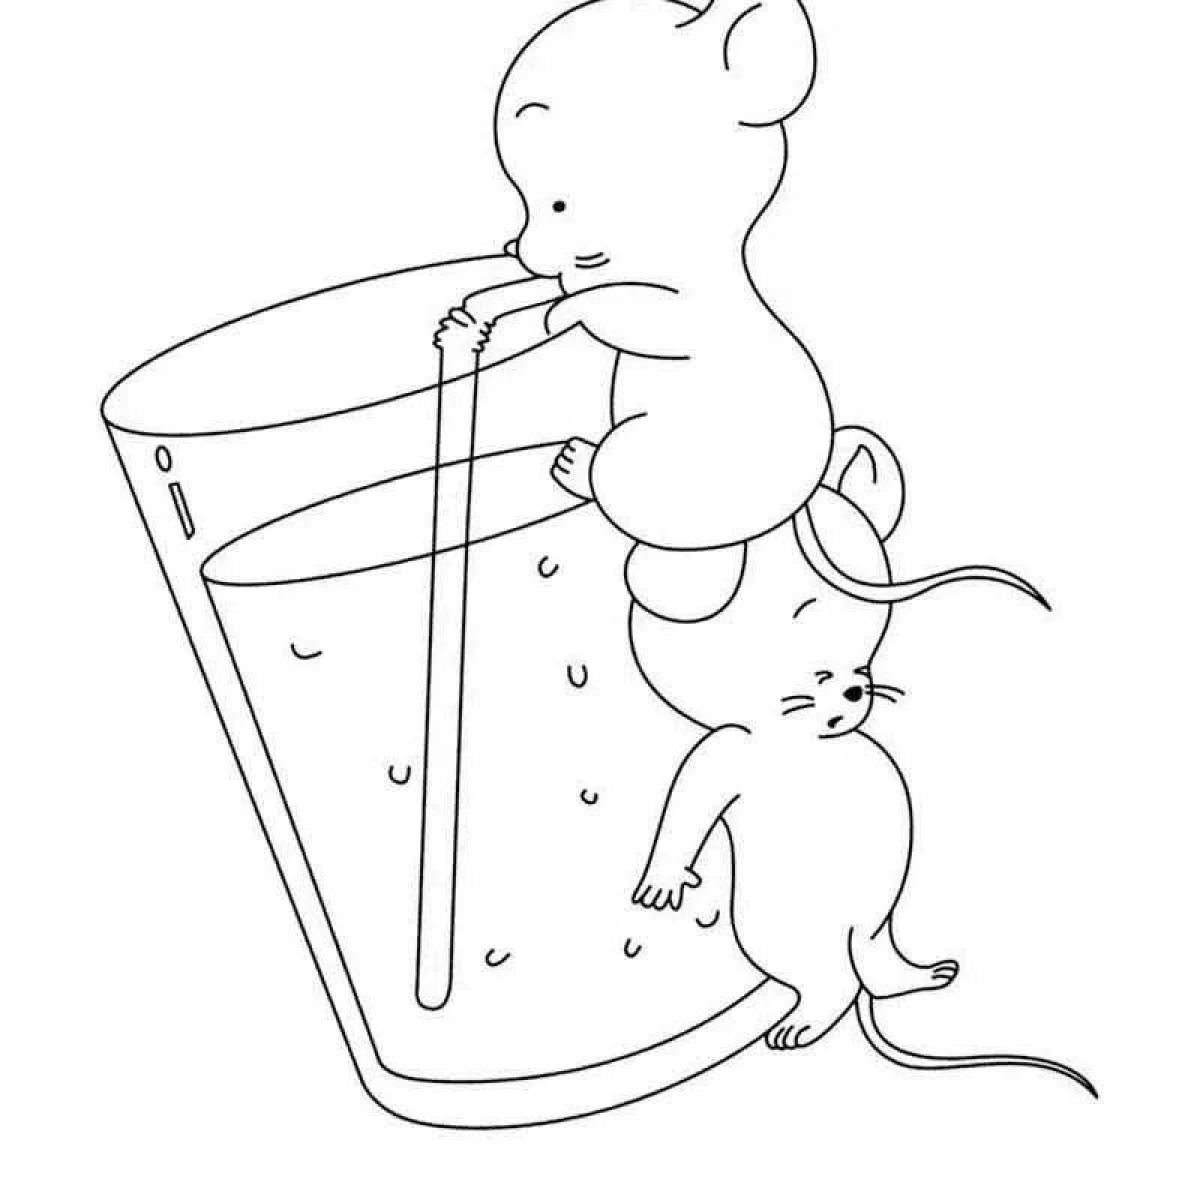 Coloring page charming mouse sausage